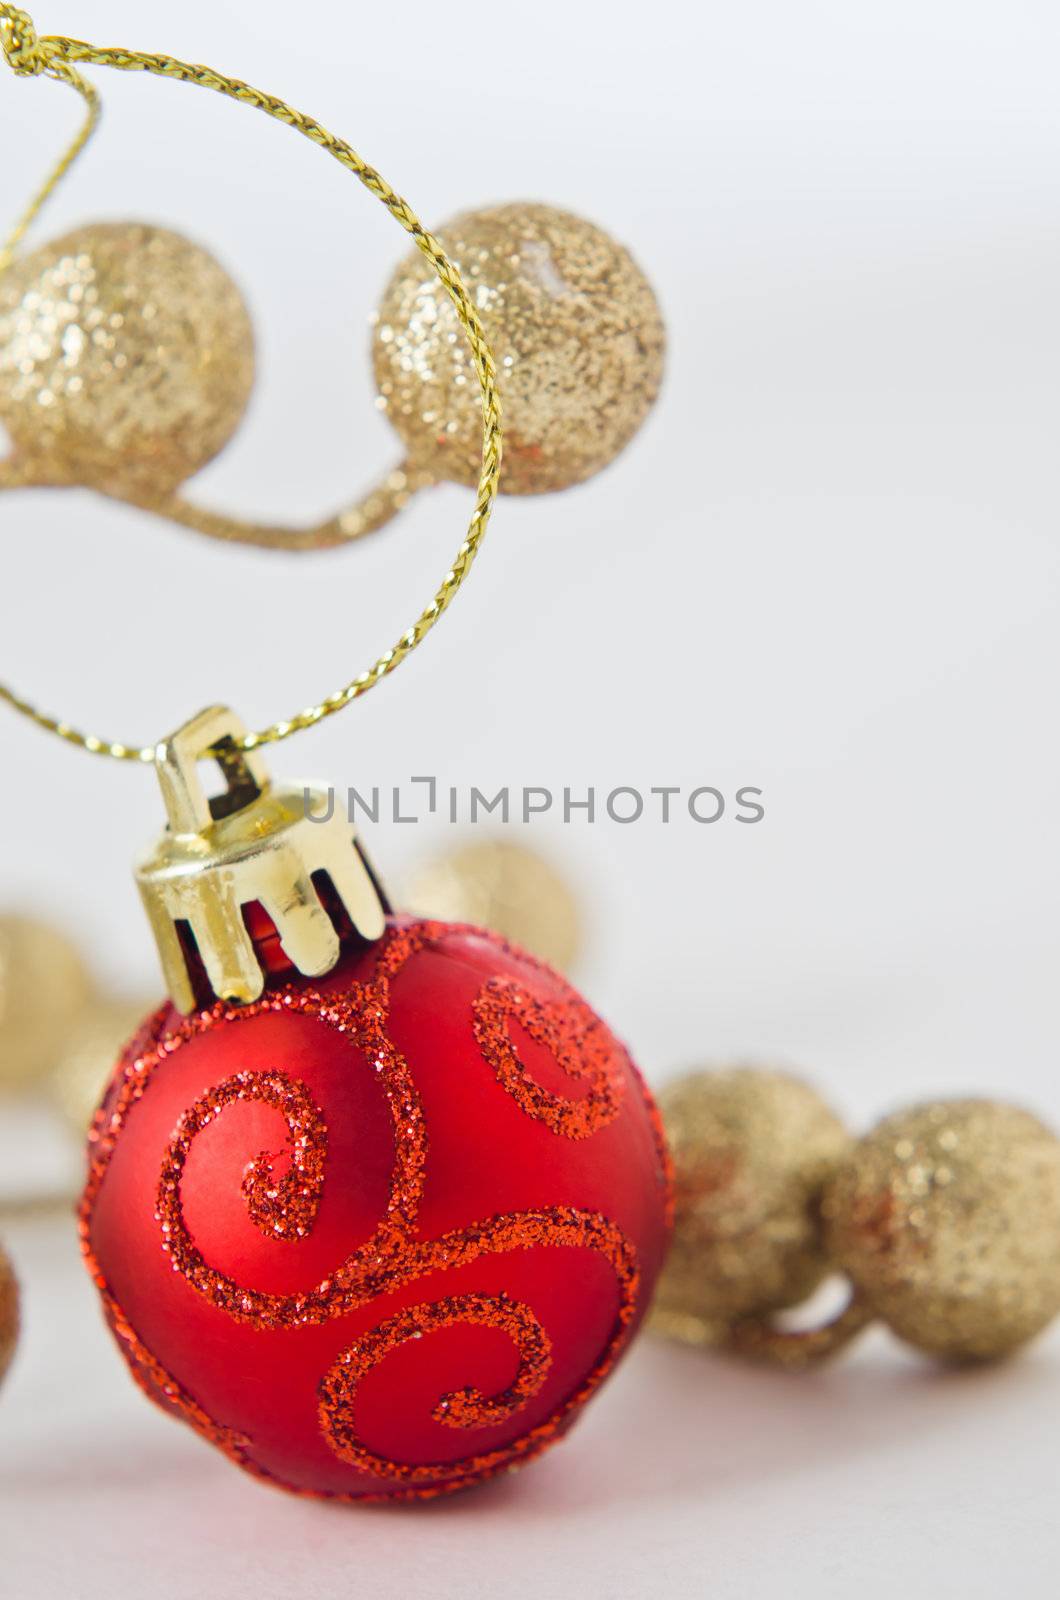 A patterned red bauble, with gold glittery balls in soft focus off-white background.  